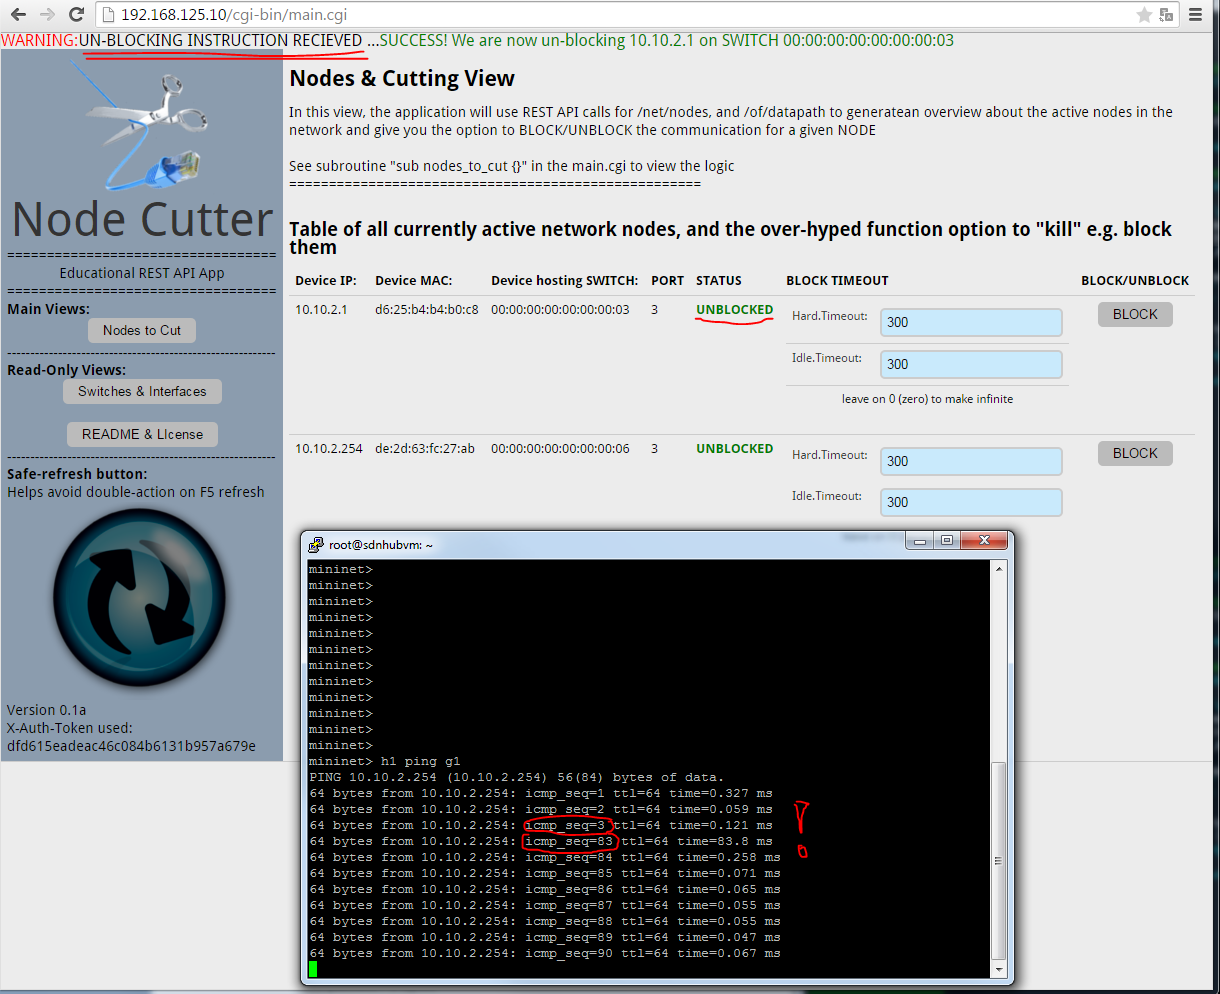 Node Cutter - v0.1 Nodes to Cut view, unblocking node H1 success message and ping recovery after several sequence numbers blocked